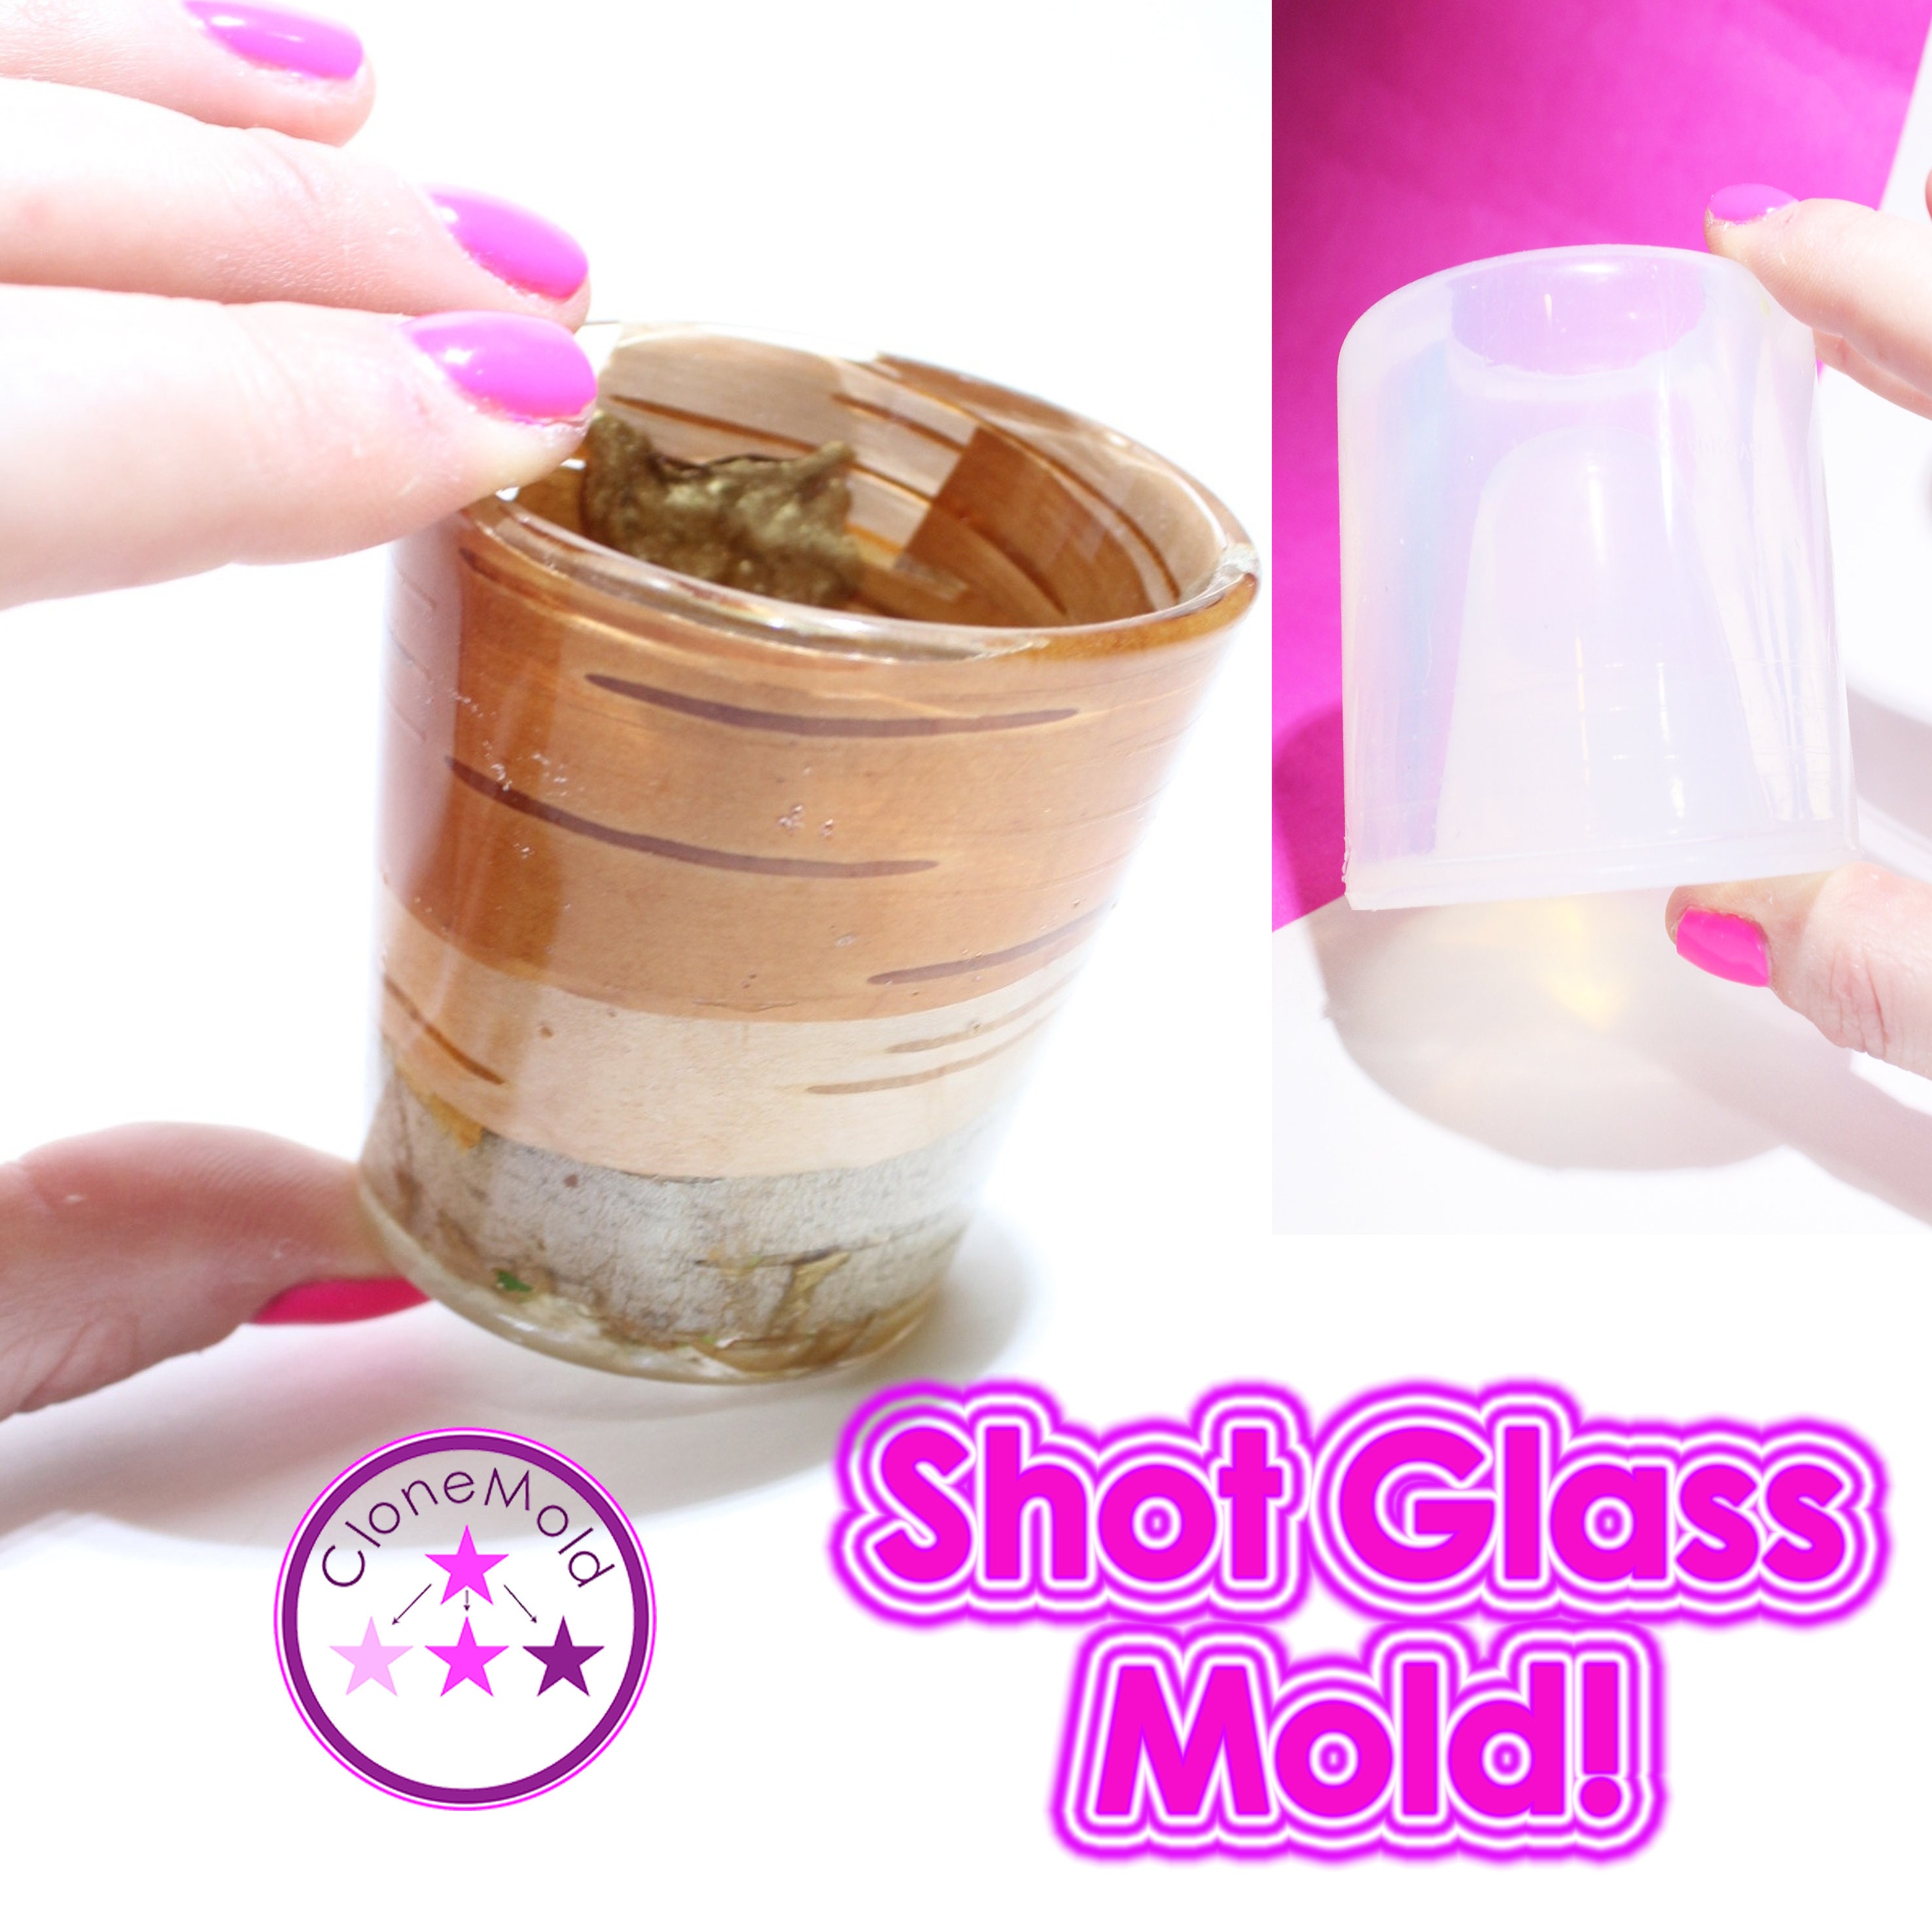 6 Pack: Shot Glass Mold by Celebrate It®